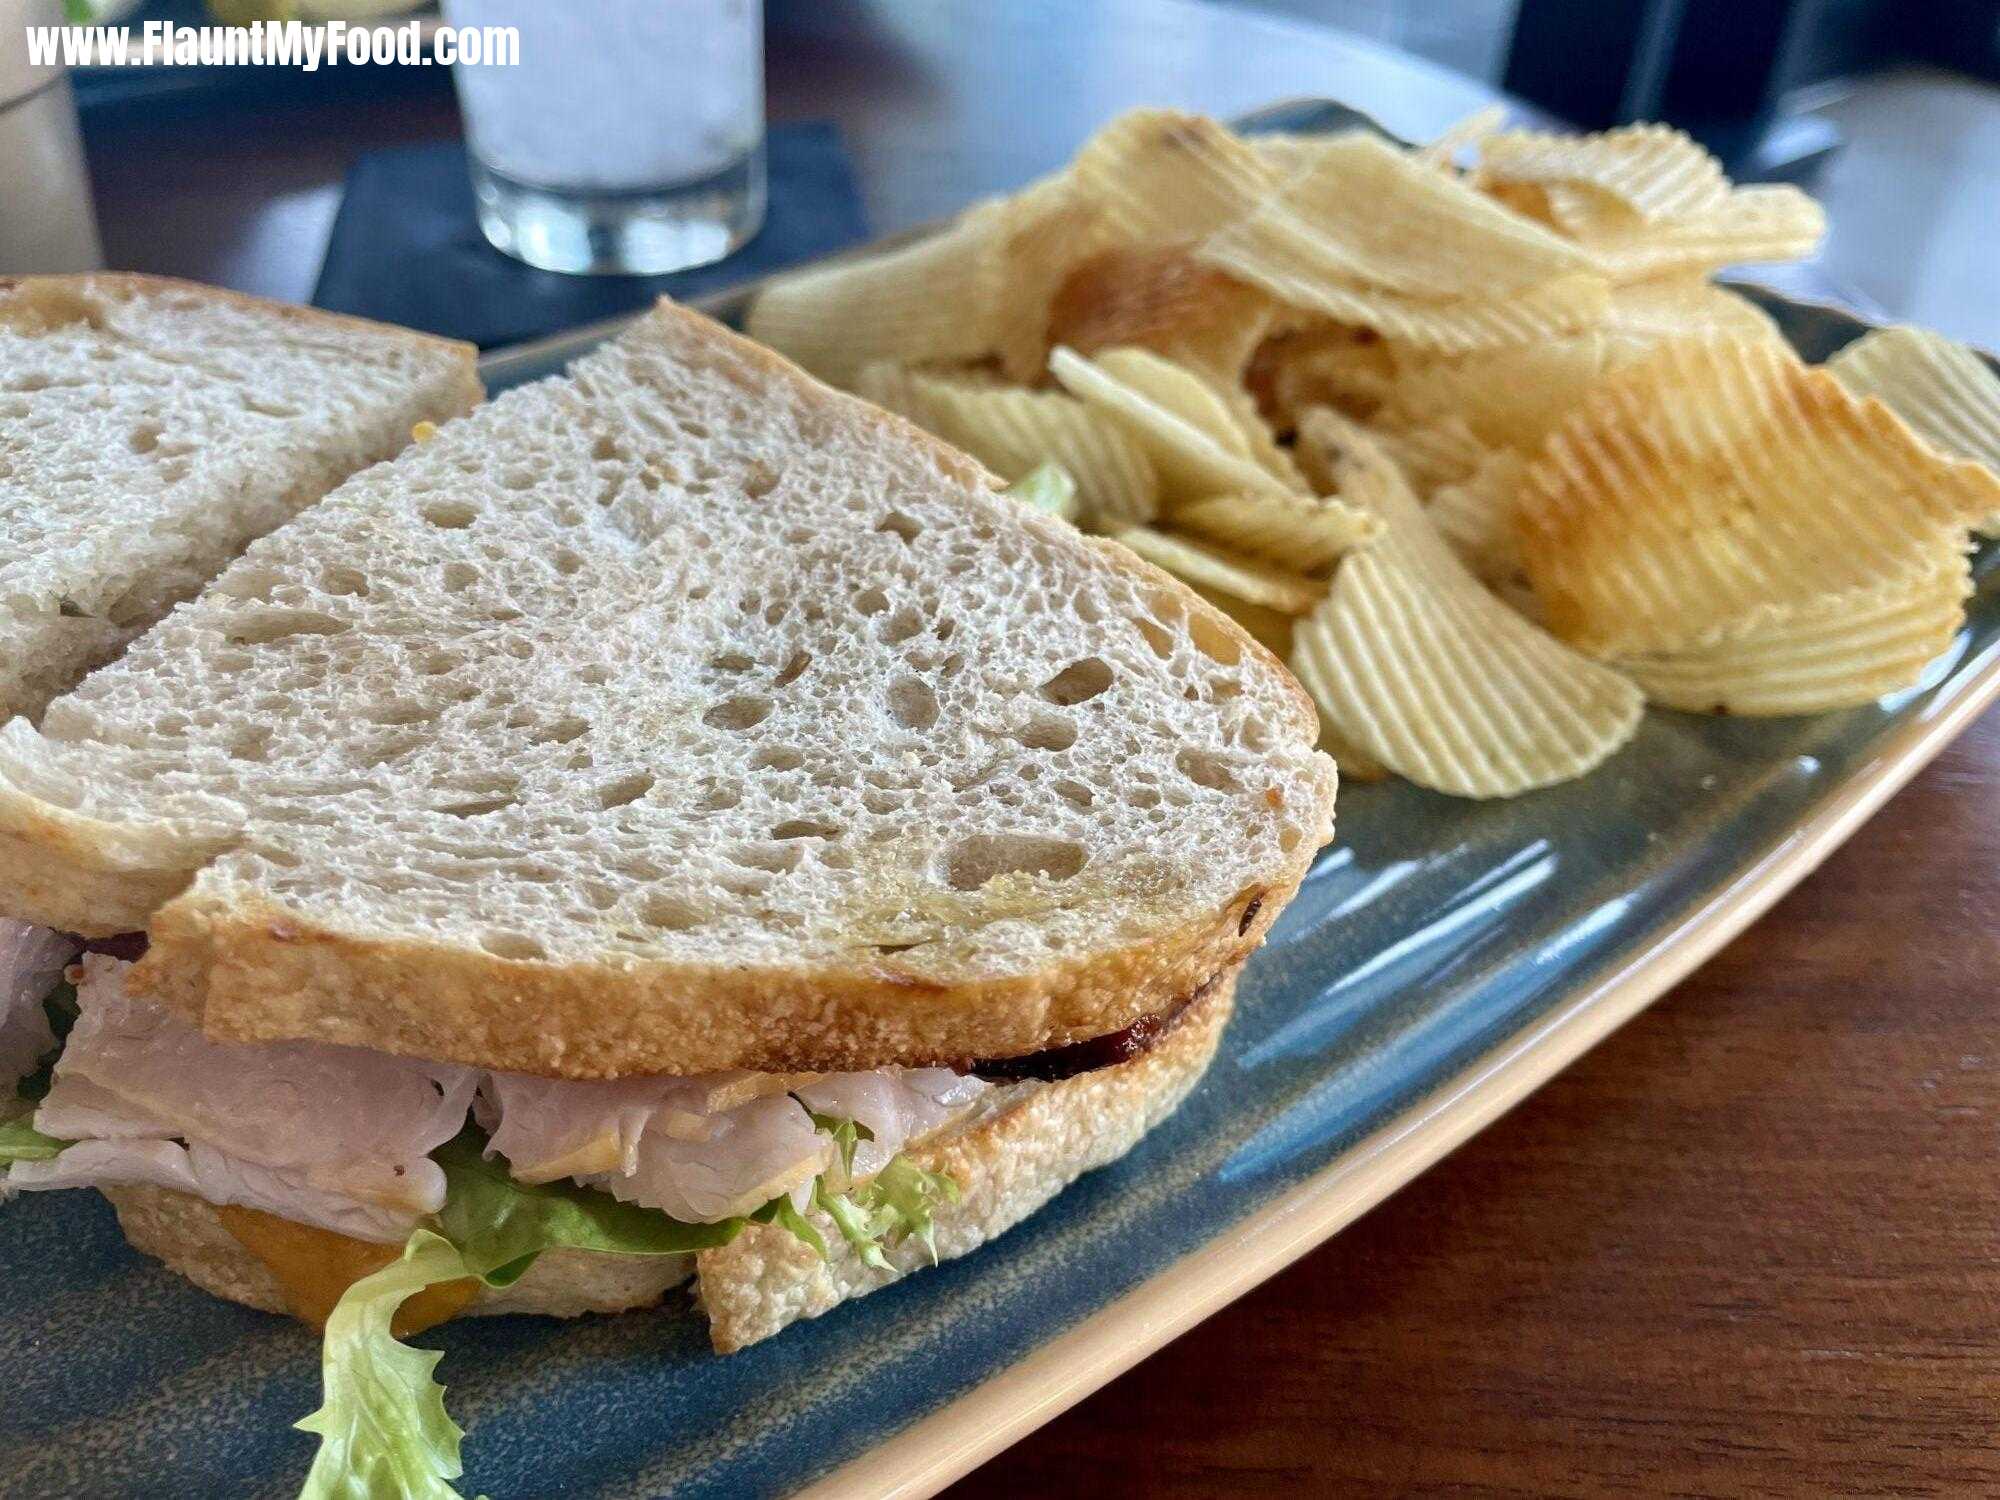 Lunch at branch and Bird downtown Fort Worth, TexasTurkey club sandwich with chips and various dips at Branchburg in downtown Fort Worth Texas on the 12th floor restaurant has a nice view of the city.